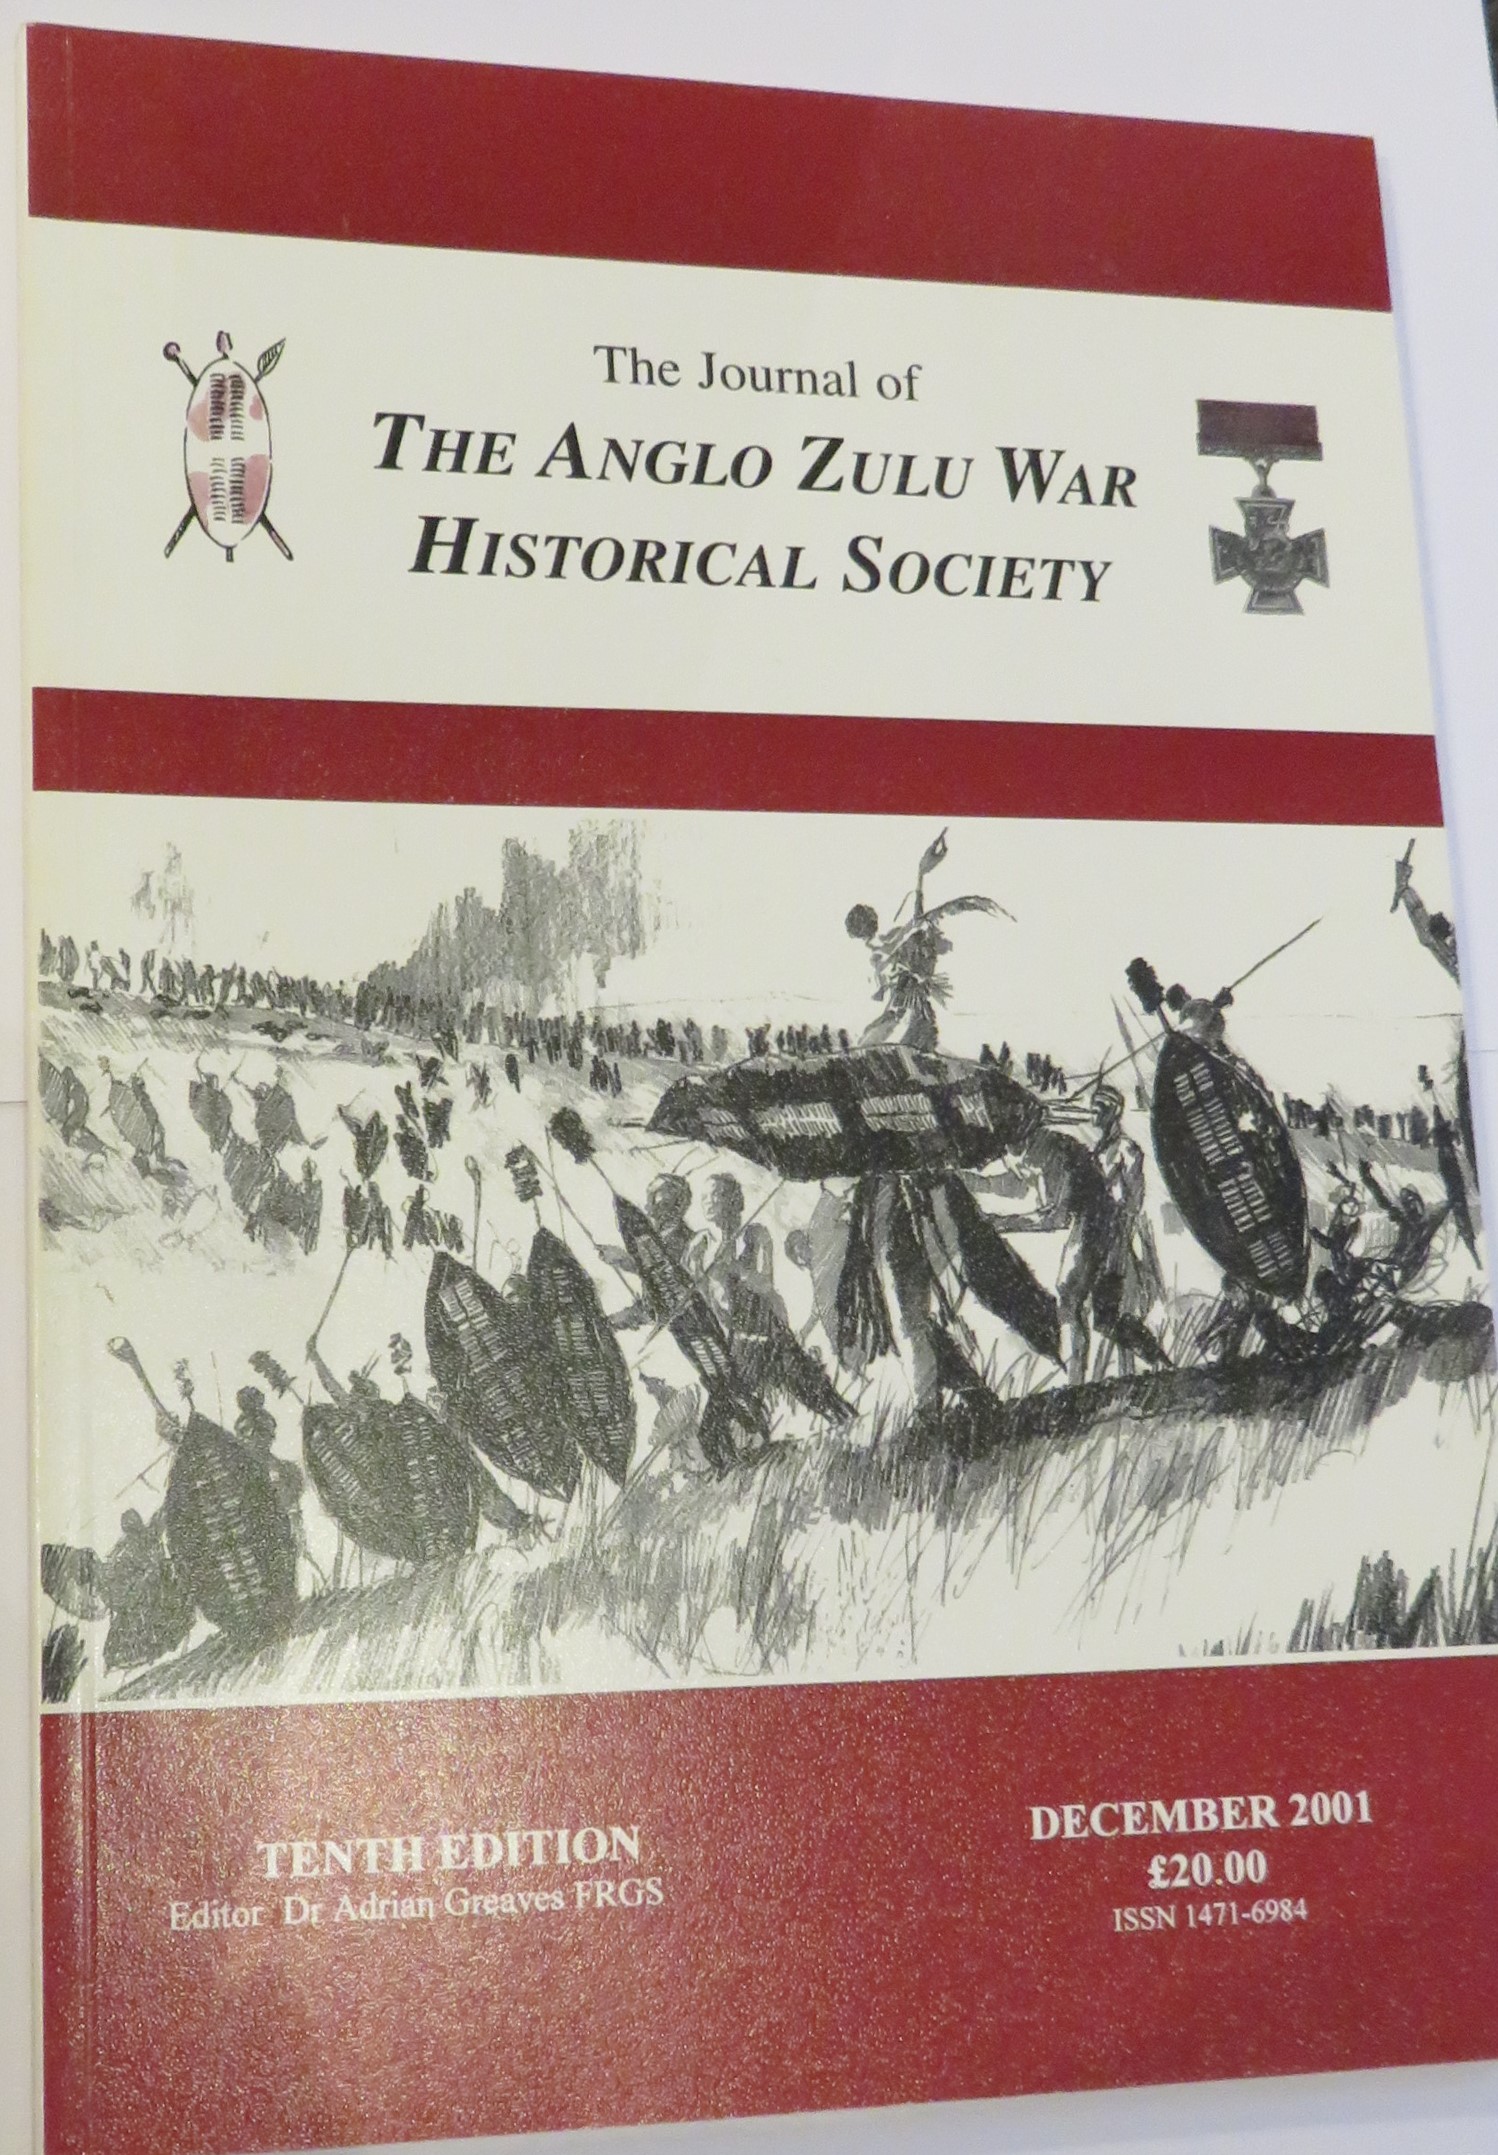 The Journal of the Anglo Zulu War Historical Society December 2001